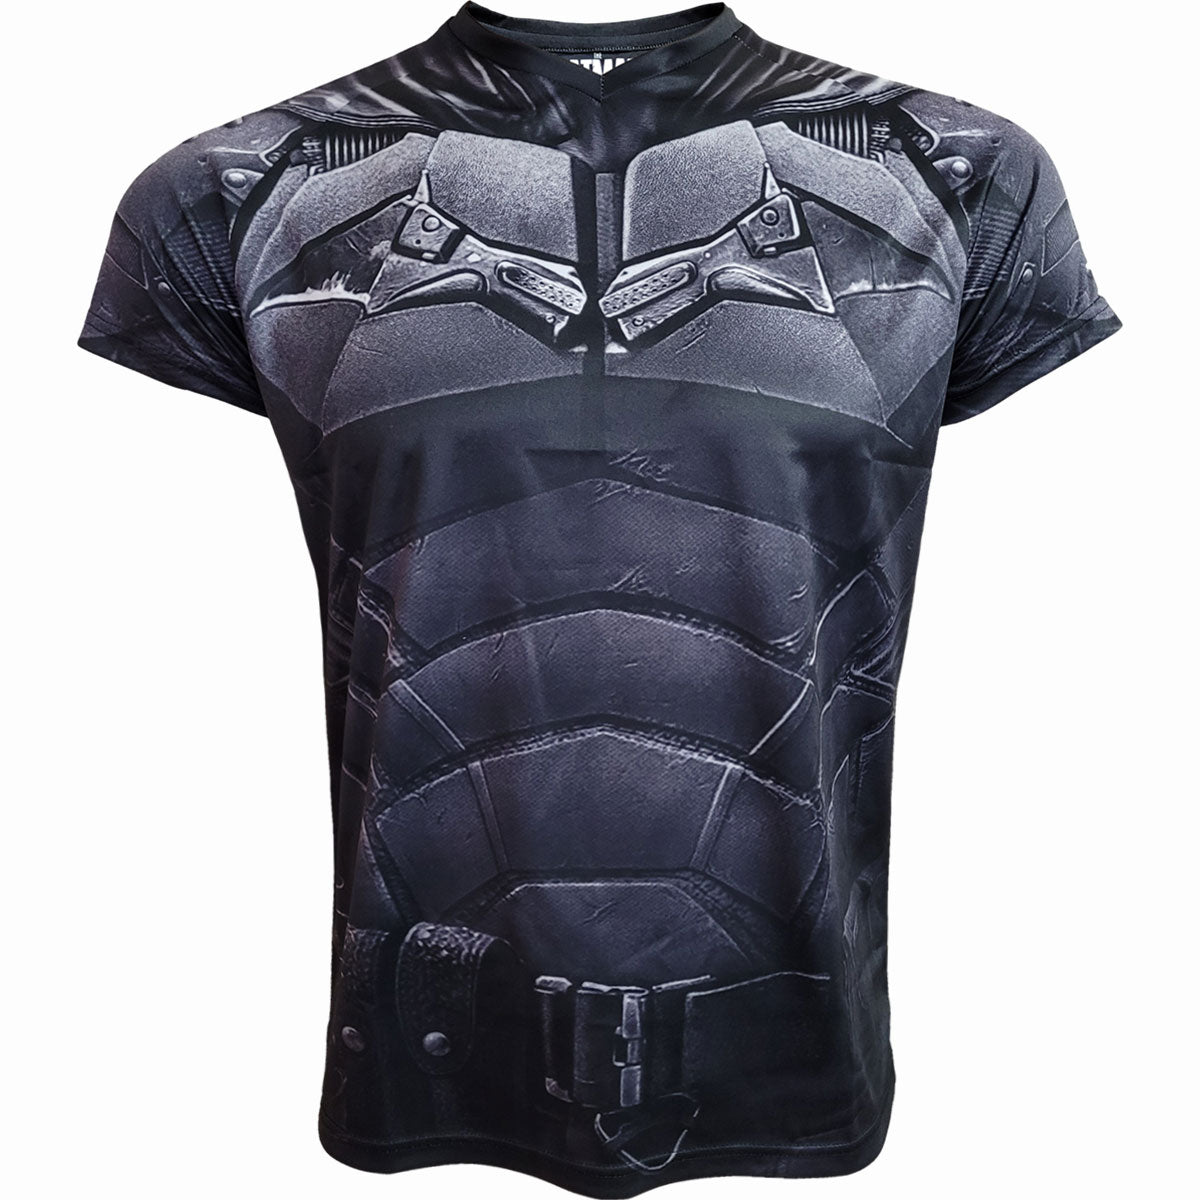 THE BATMAN - MUSCLE CAPE - Sustainable Football Shirts